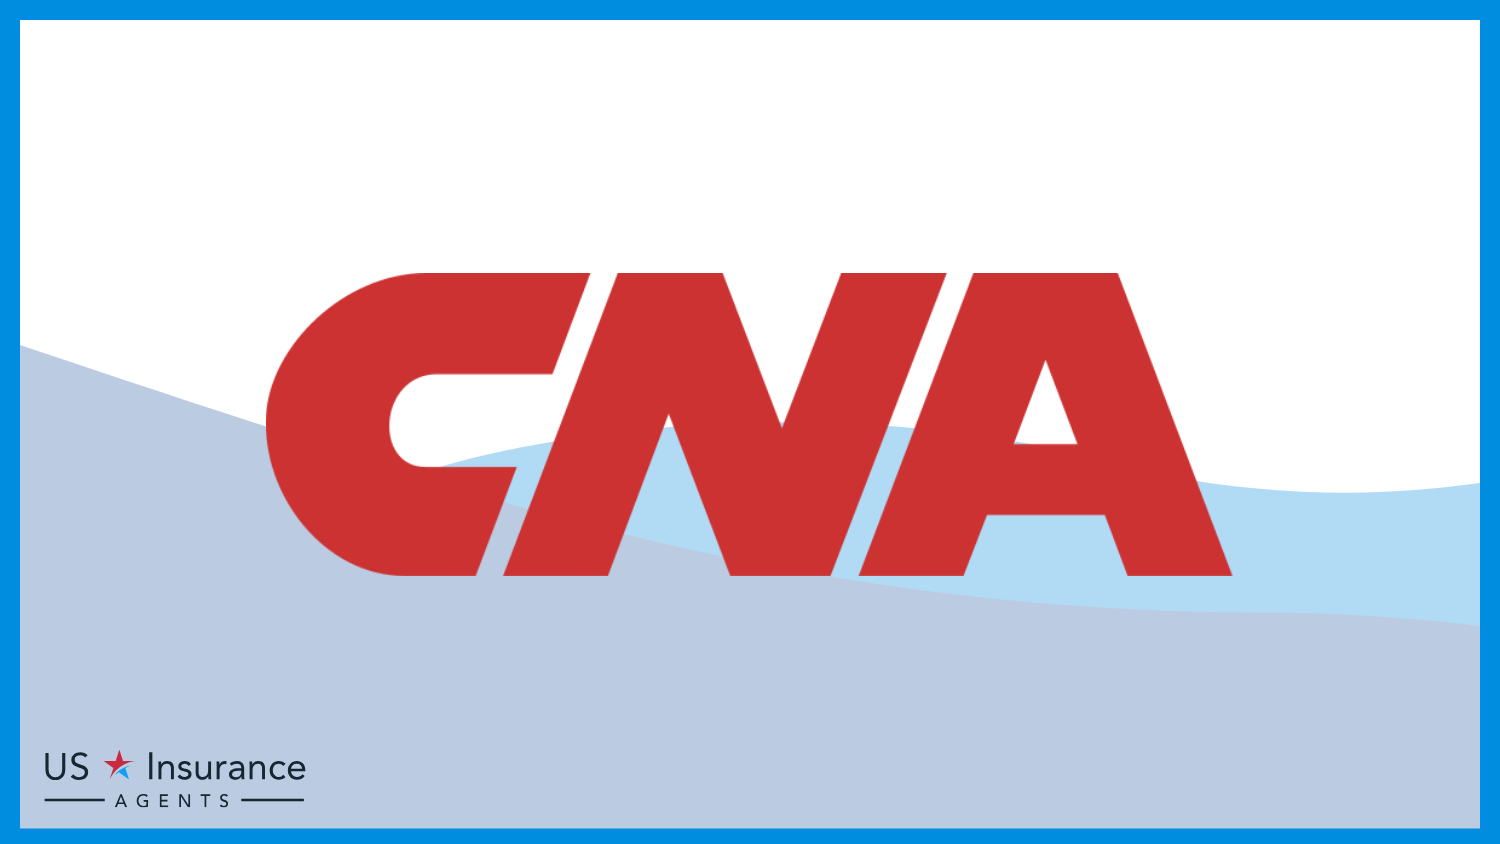 CNA: Best Business Insurance for Financial Services